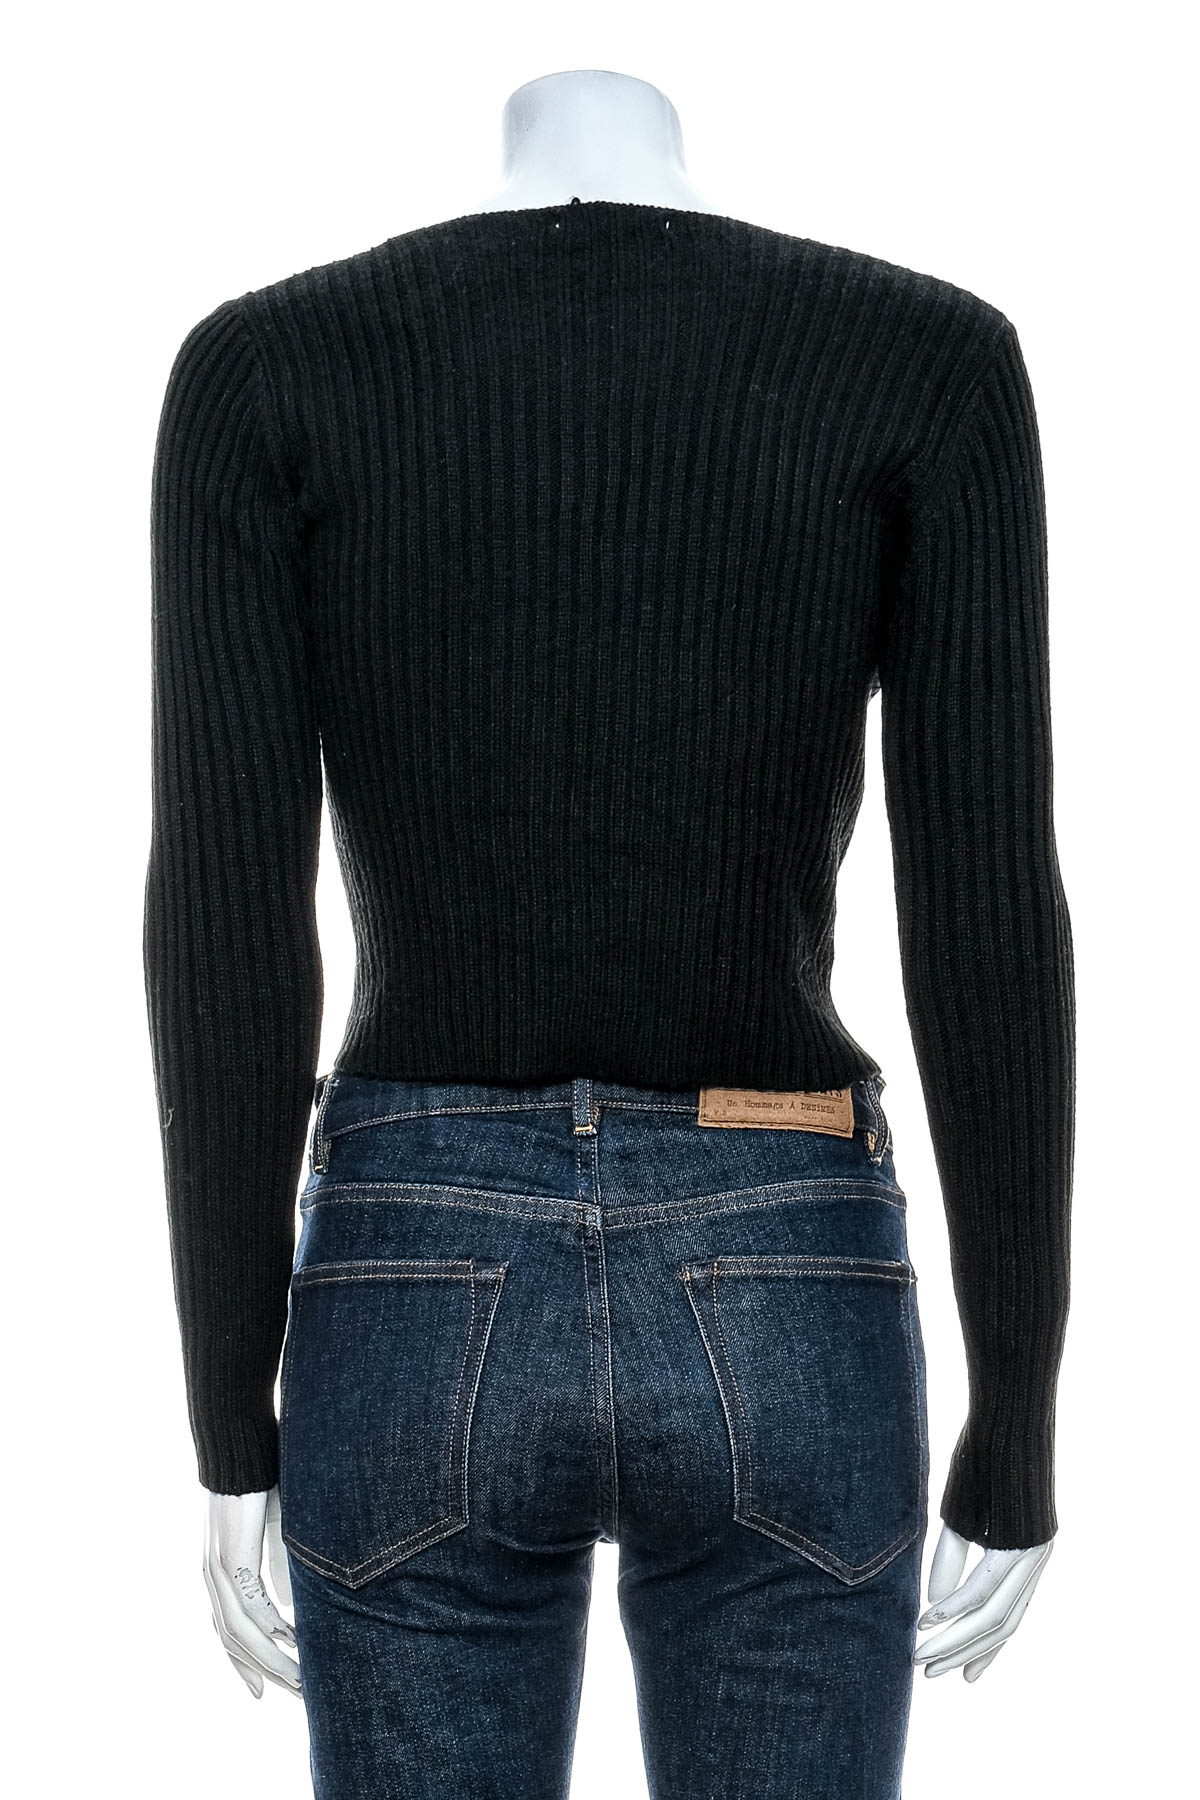 Women's sweater - Color - 1